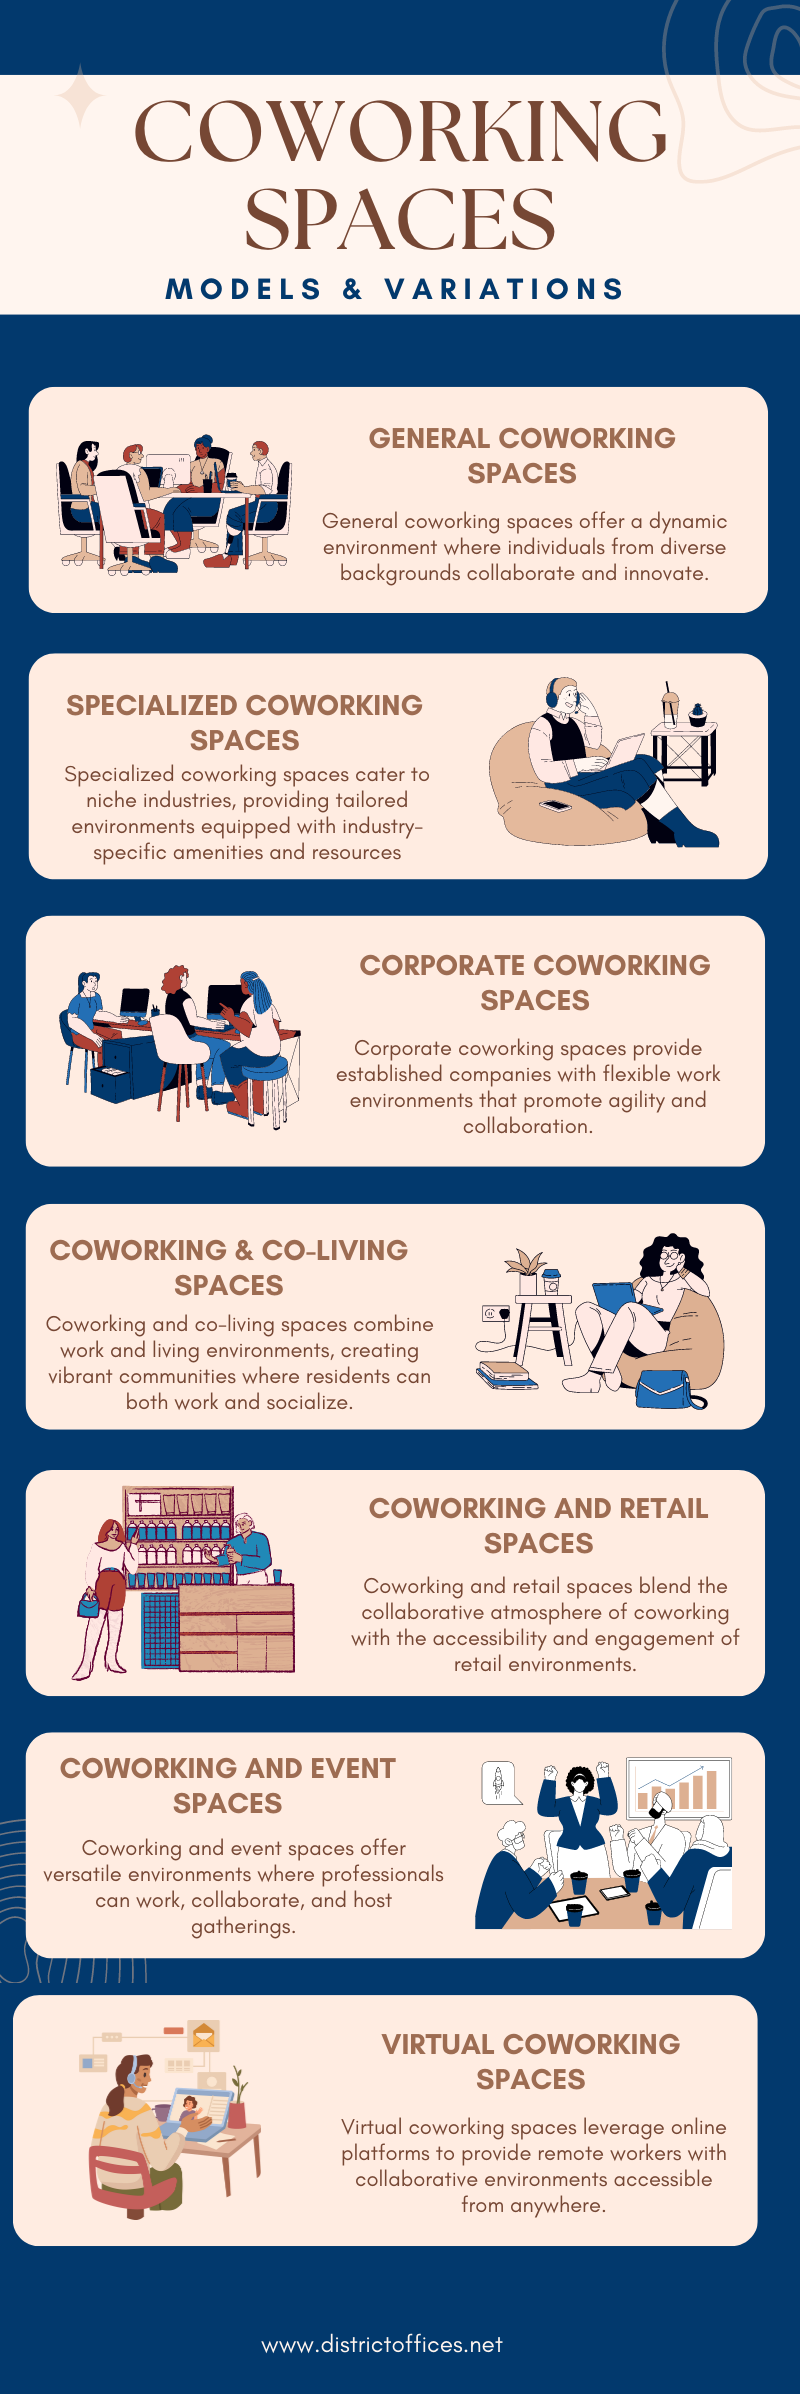 coworking types infographic